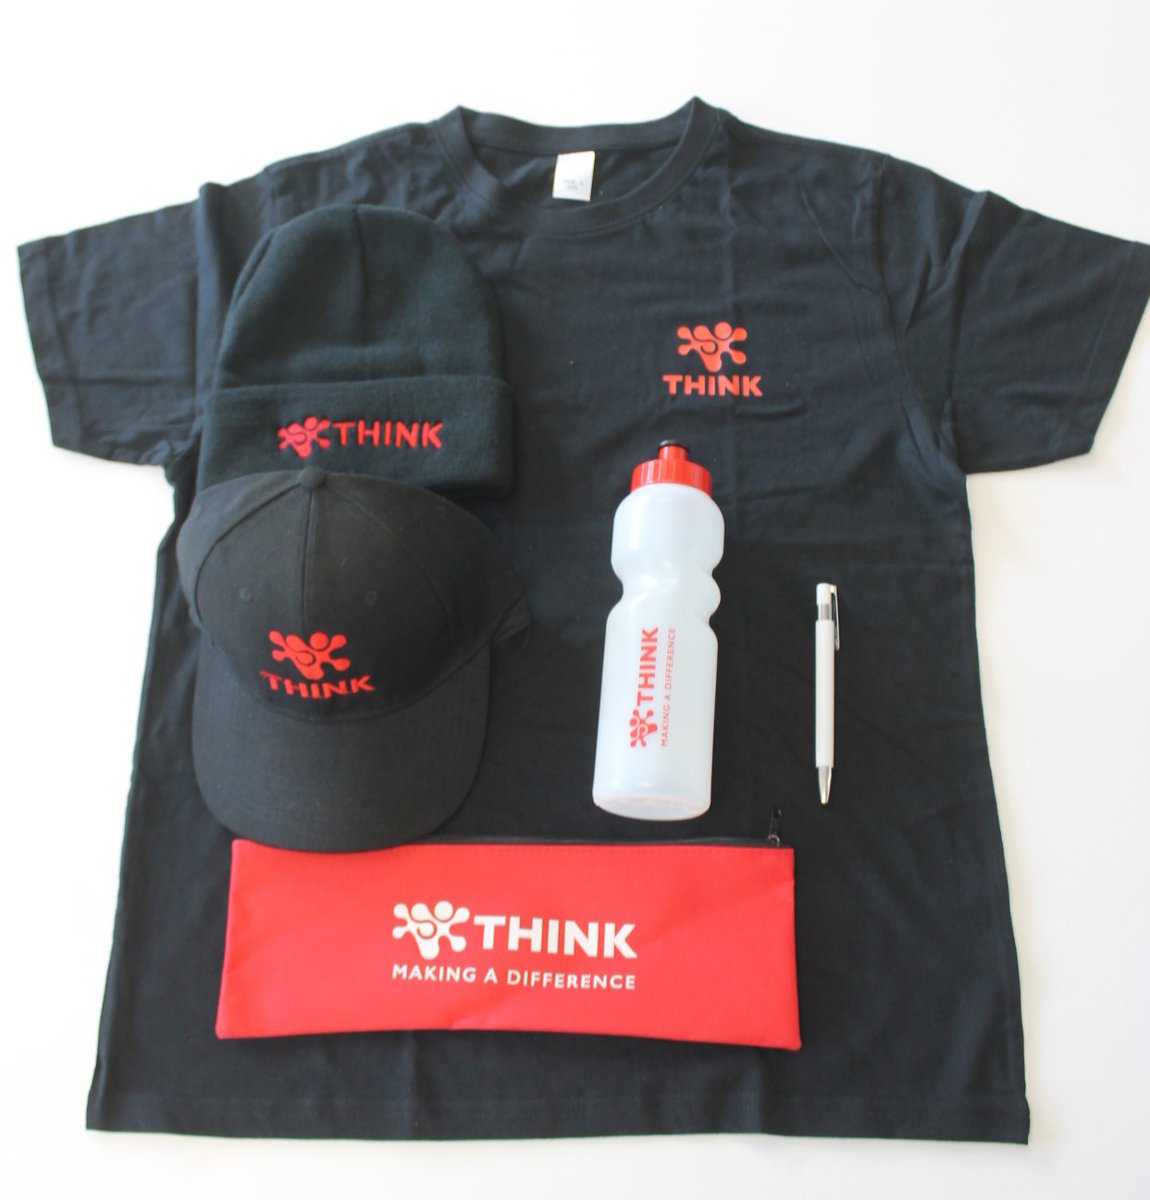 The competition to win these limited edition THINK merchandise is still open to the public. To ENTER SIMPLY: • RETWEET THIS TWEET • FOLLOW @think_tb_hiv • TAG THREE FRIENDS IN THE COMMENT SECTIONS